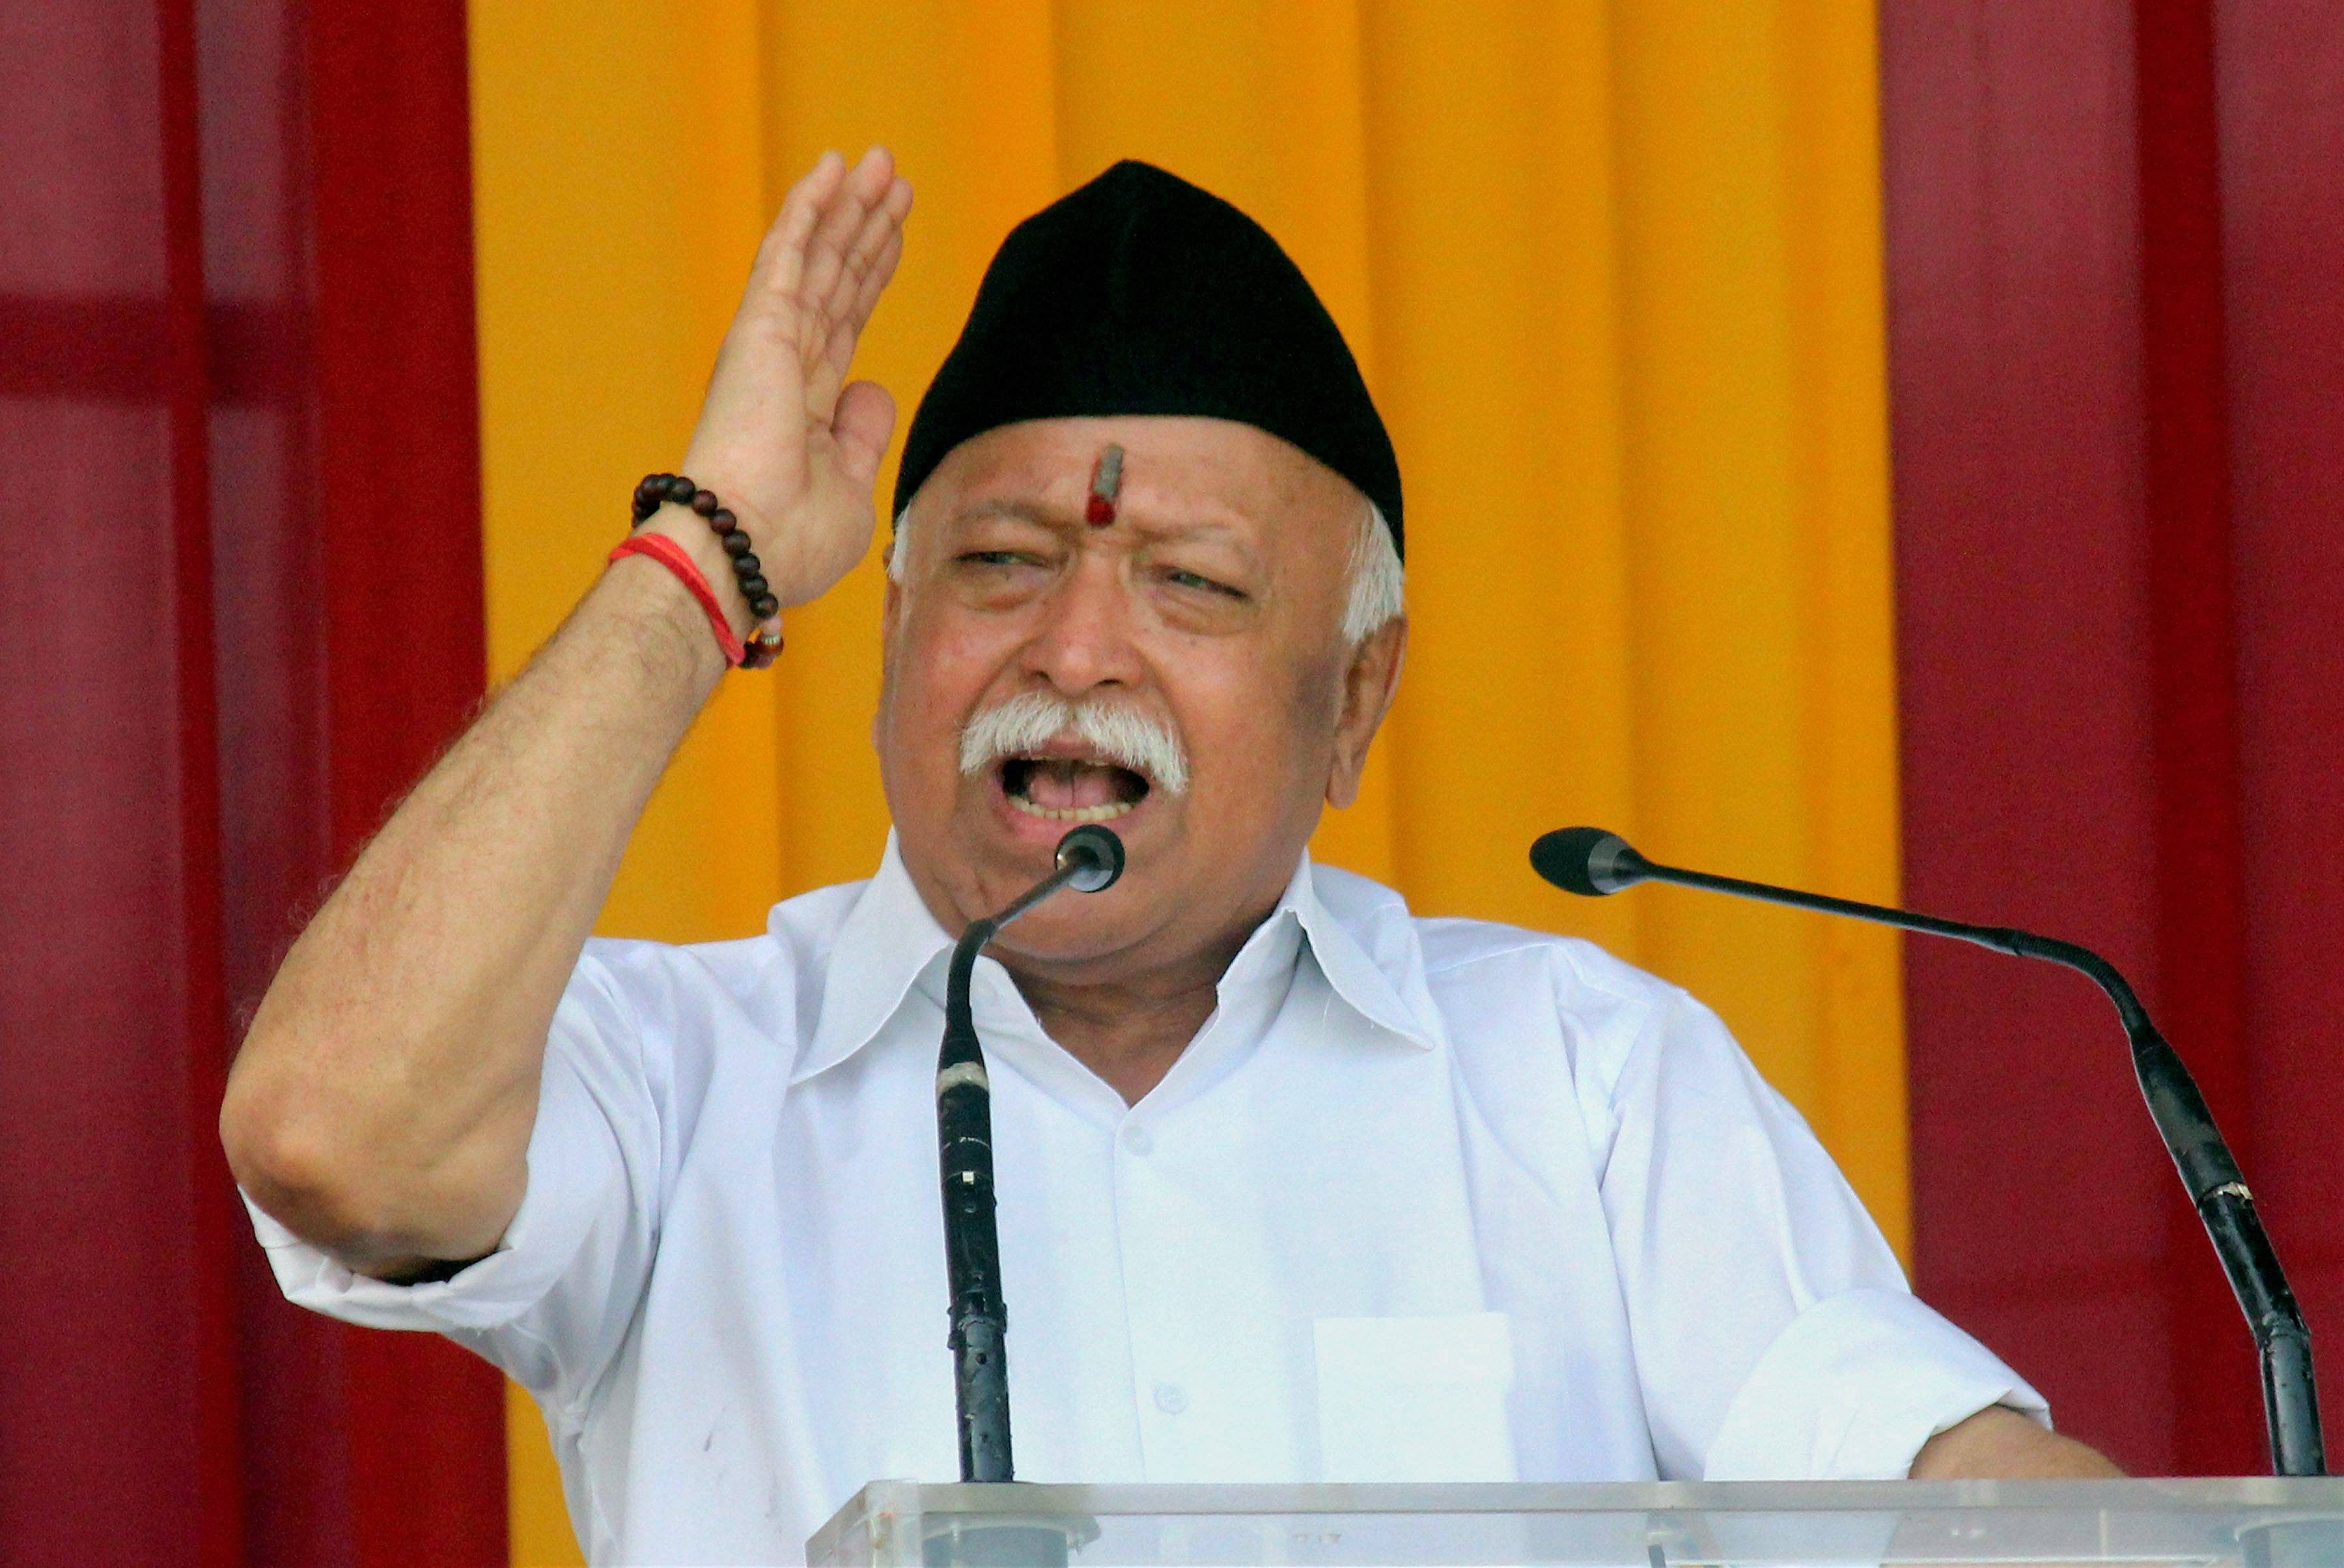 RSS Chief Mohan Bhagwat. Credit: PTI File Photo